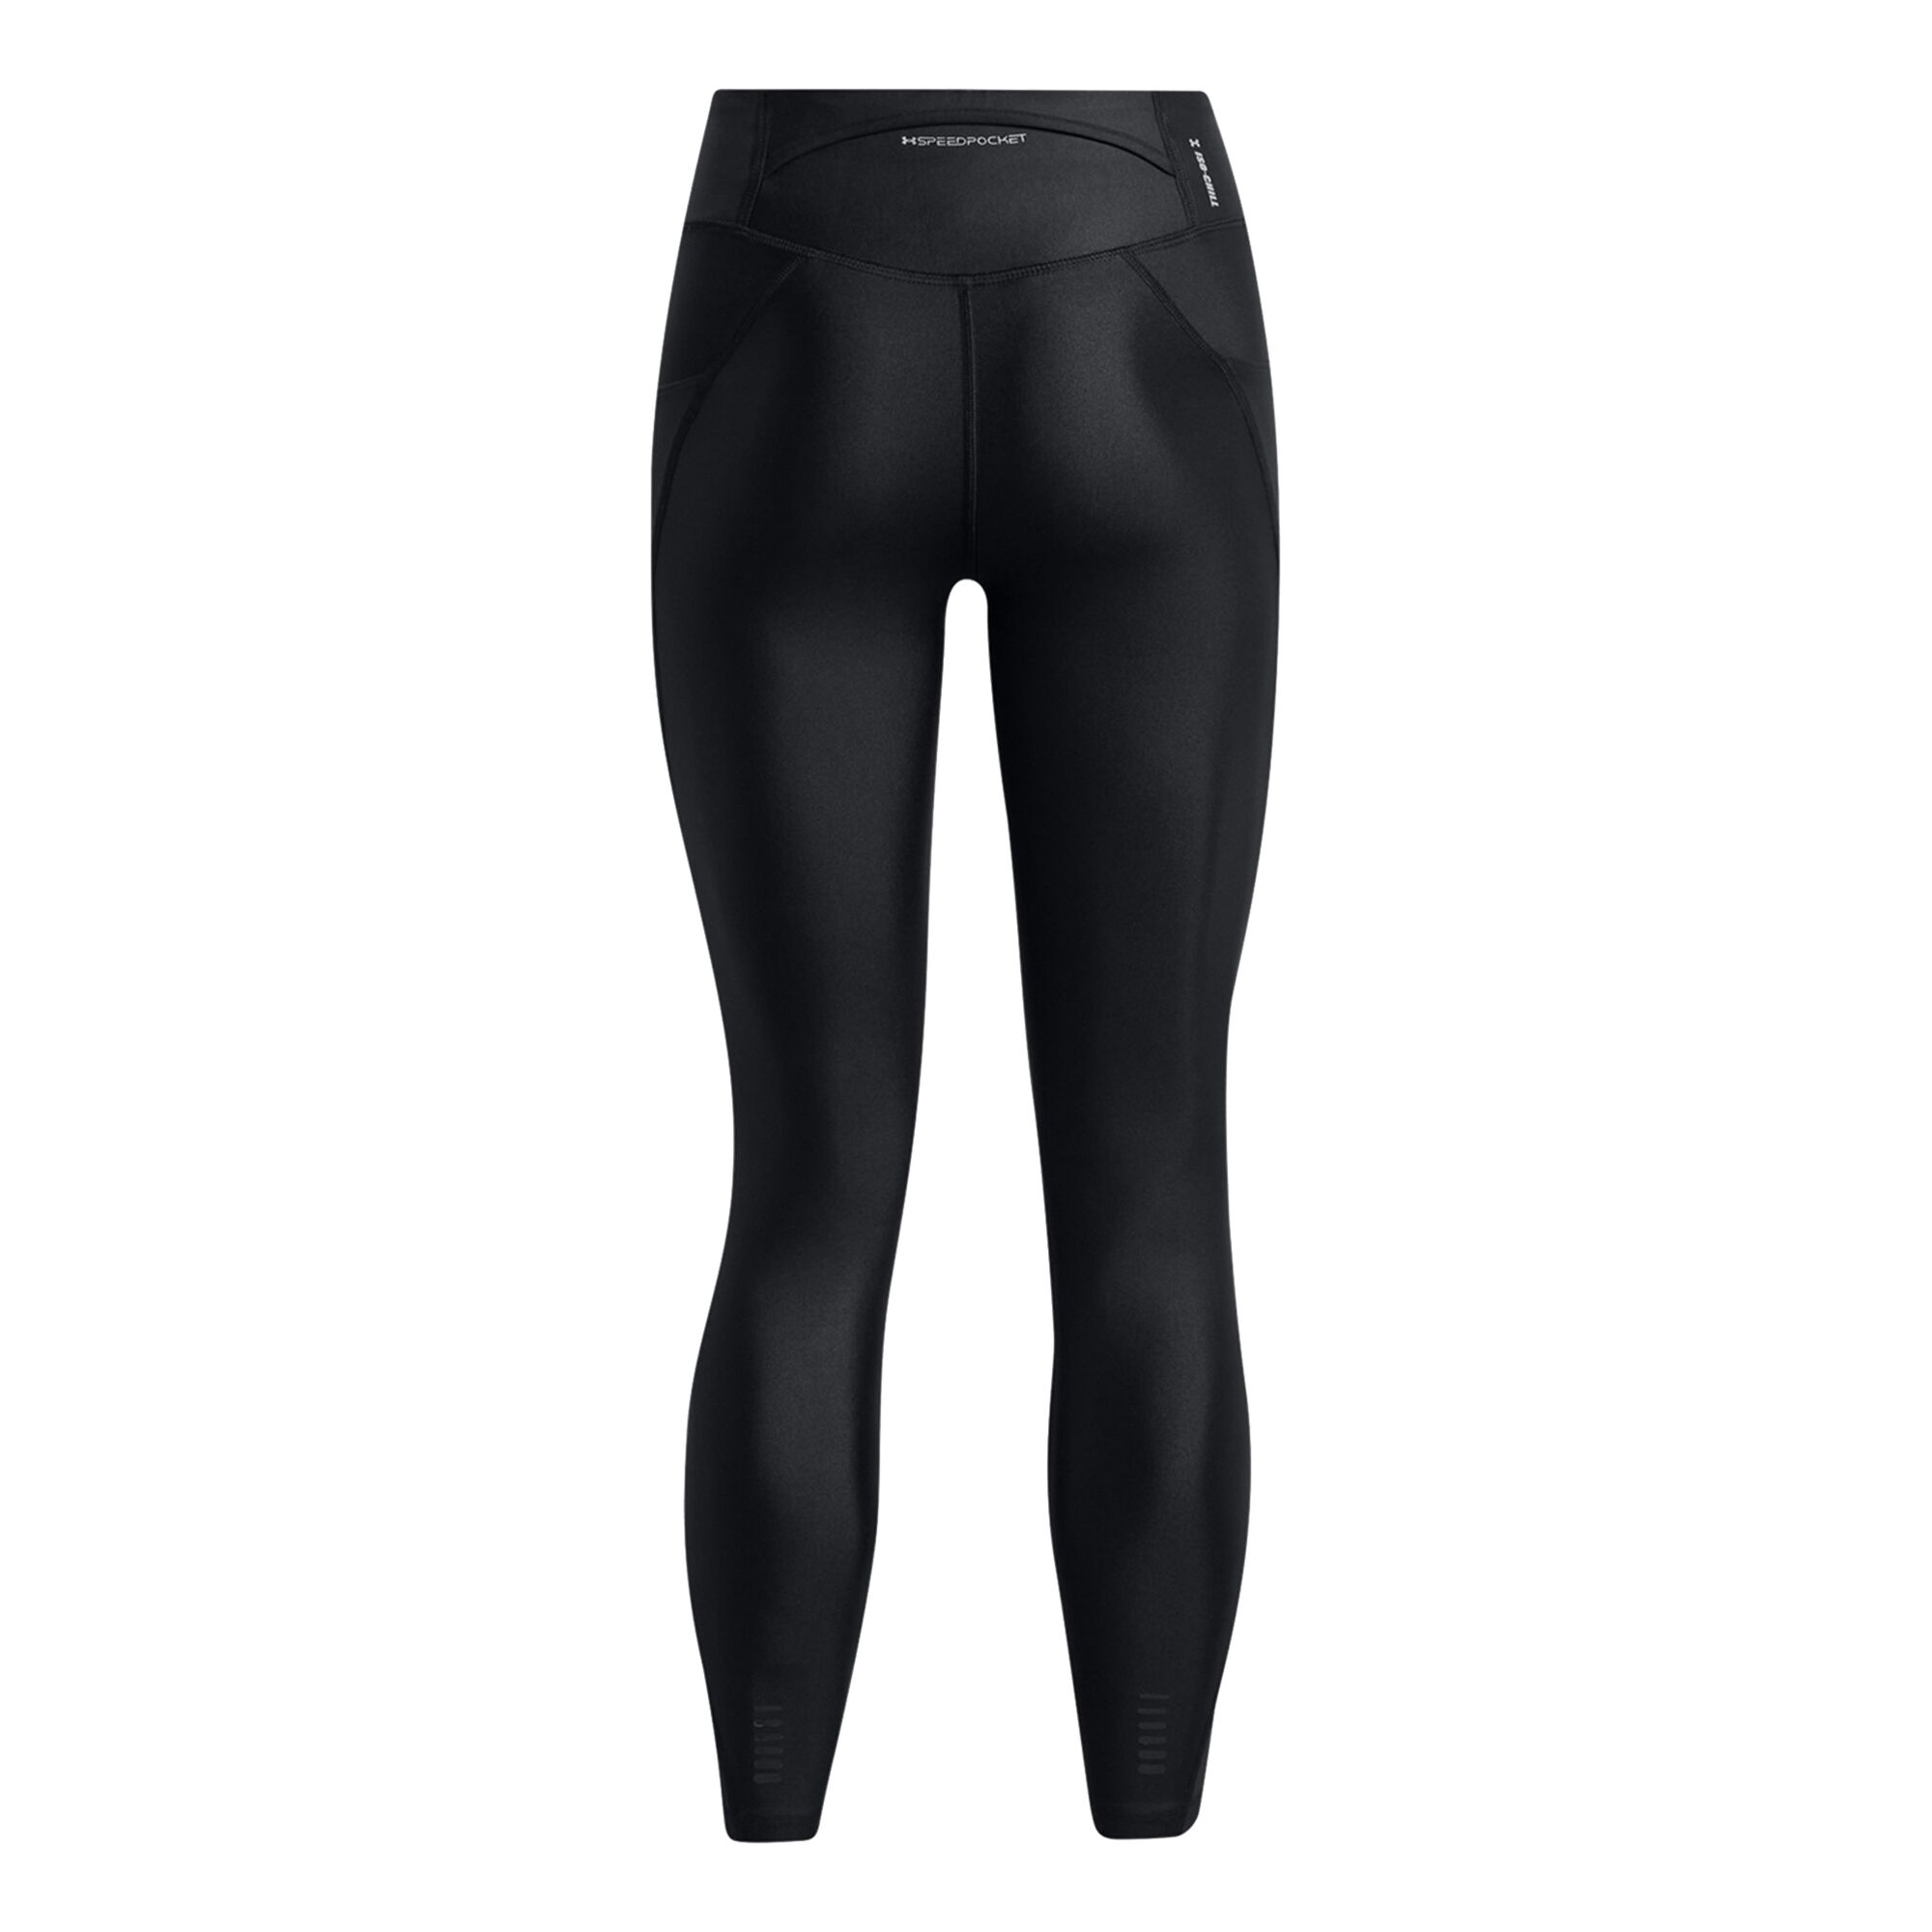 Buy Under Armour Fly Fast Elite IsoChill Ankle Tight Women Black